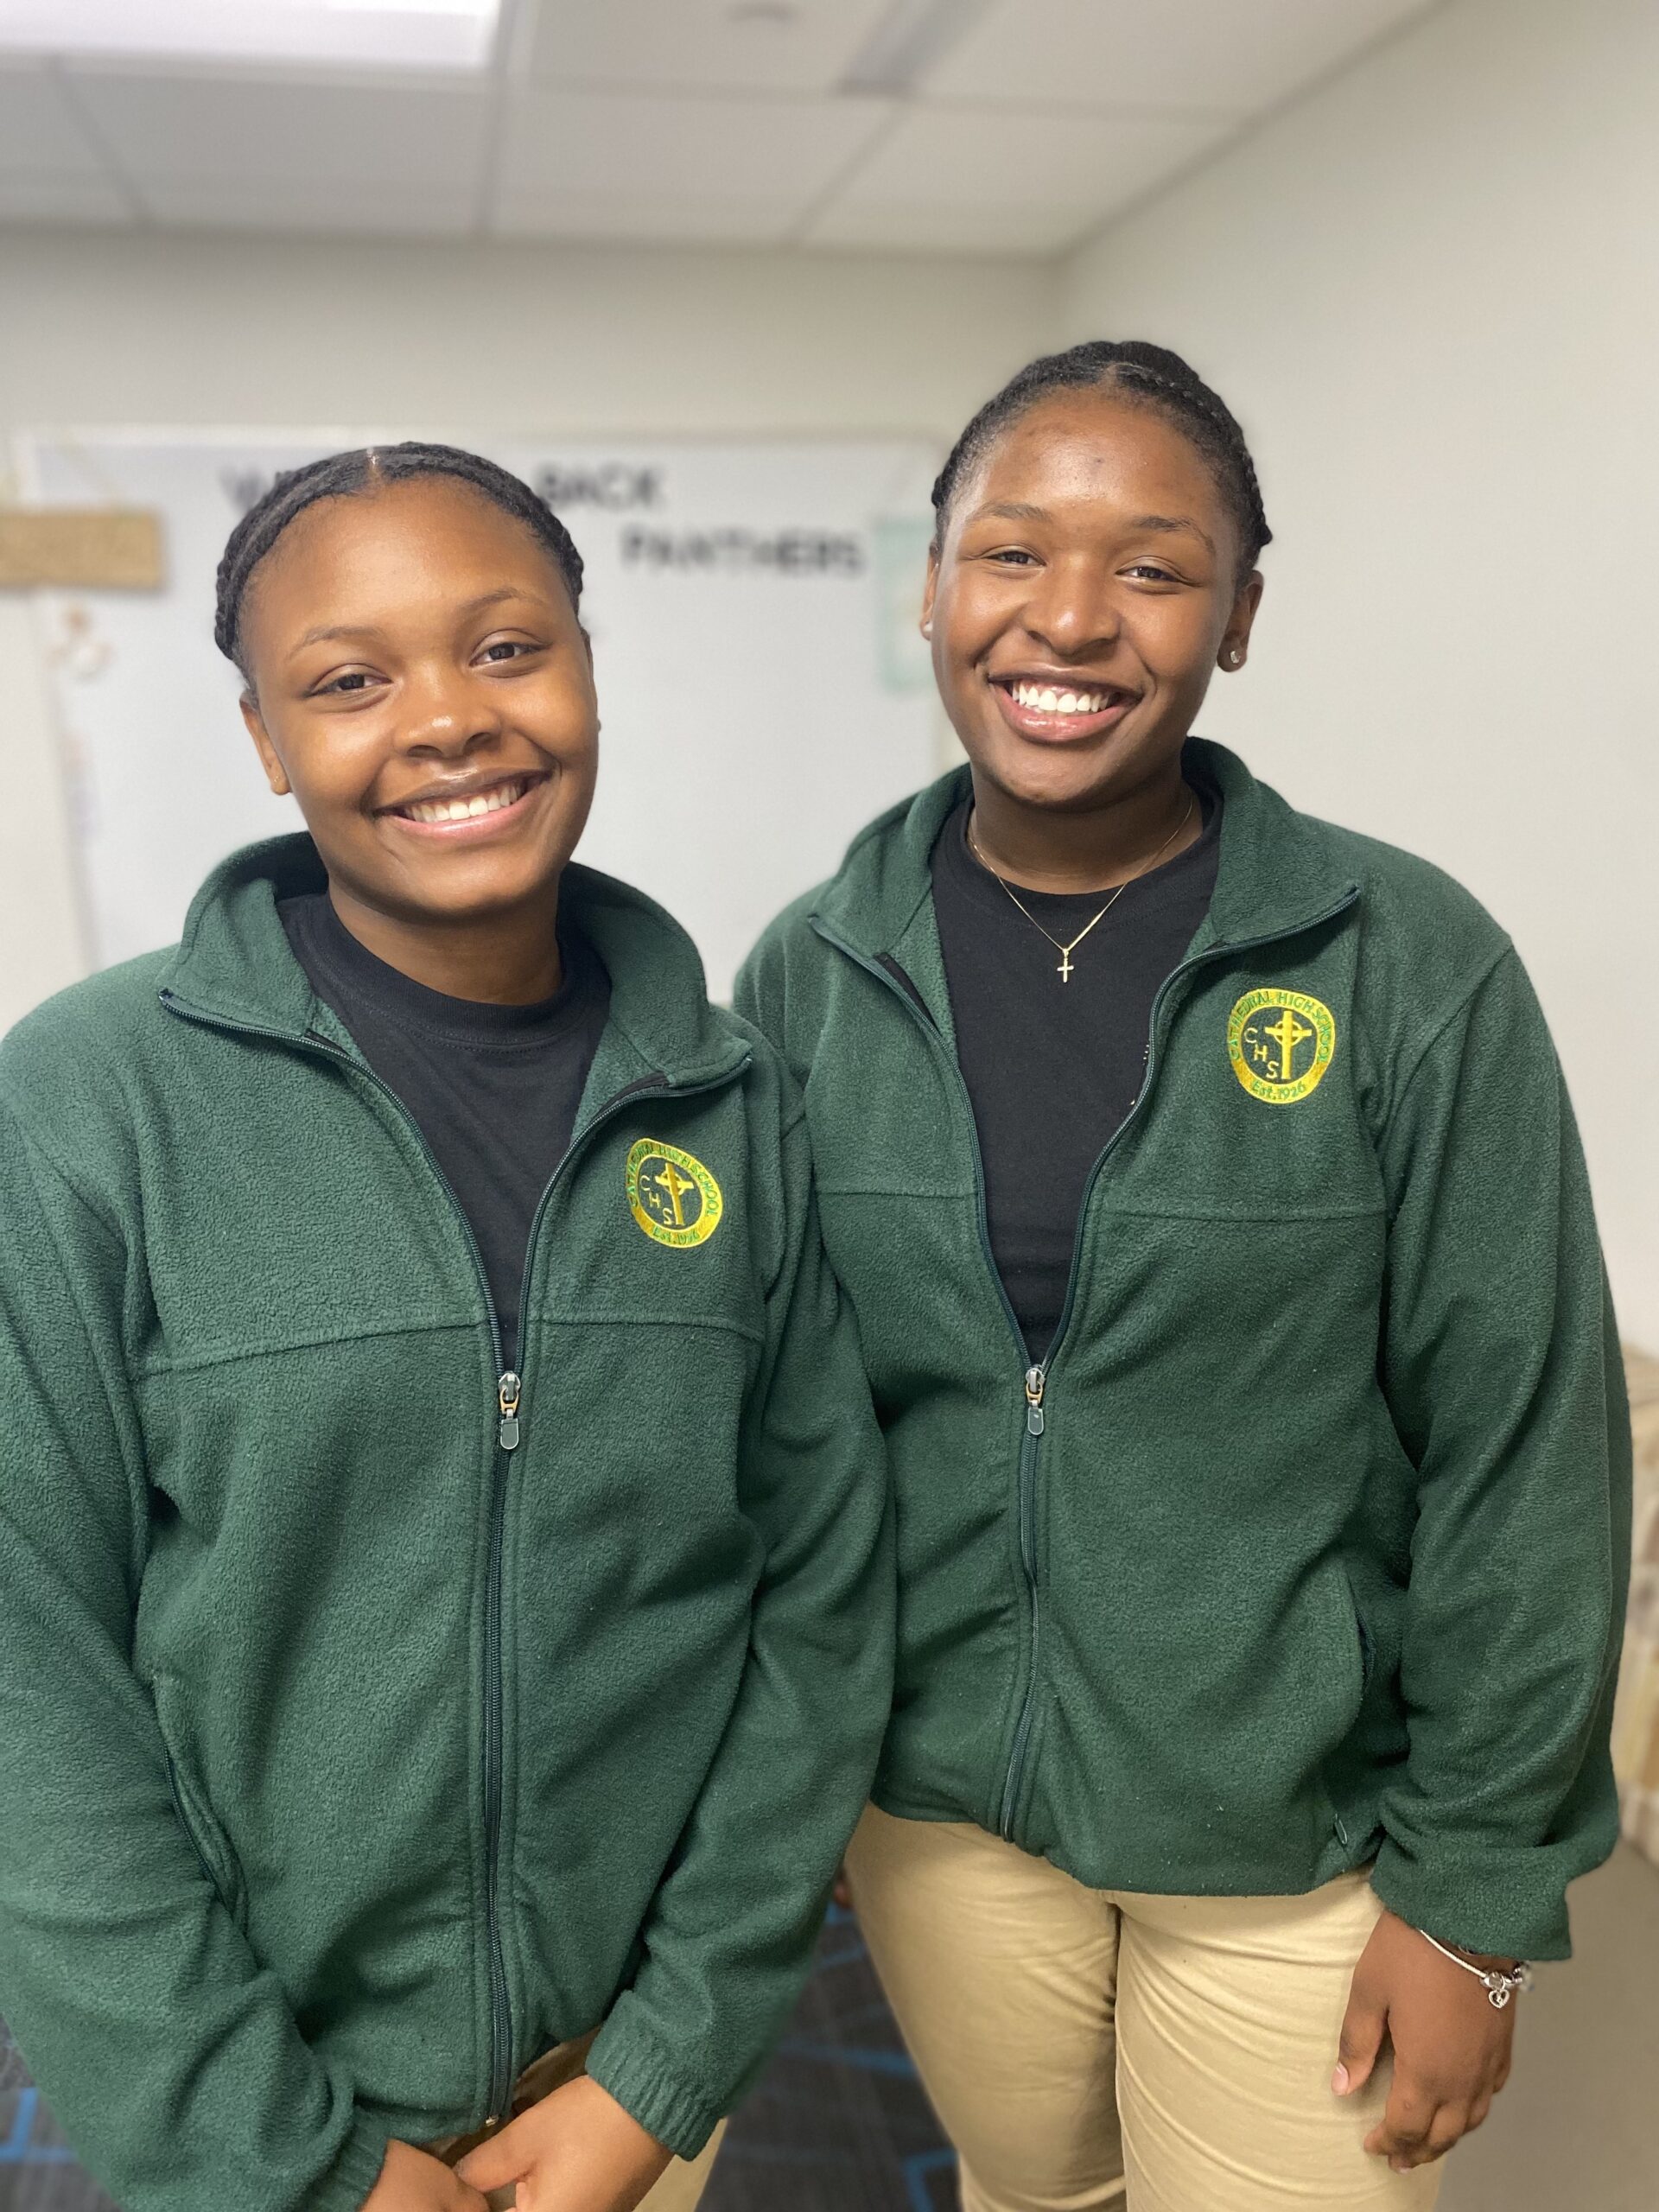 Cathedral students Andrea and Alexis, class of 2024, are two of the first students to join the new Campus Ministry student group as part of the Daley Center for Campus Ministry.